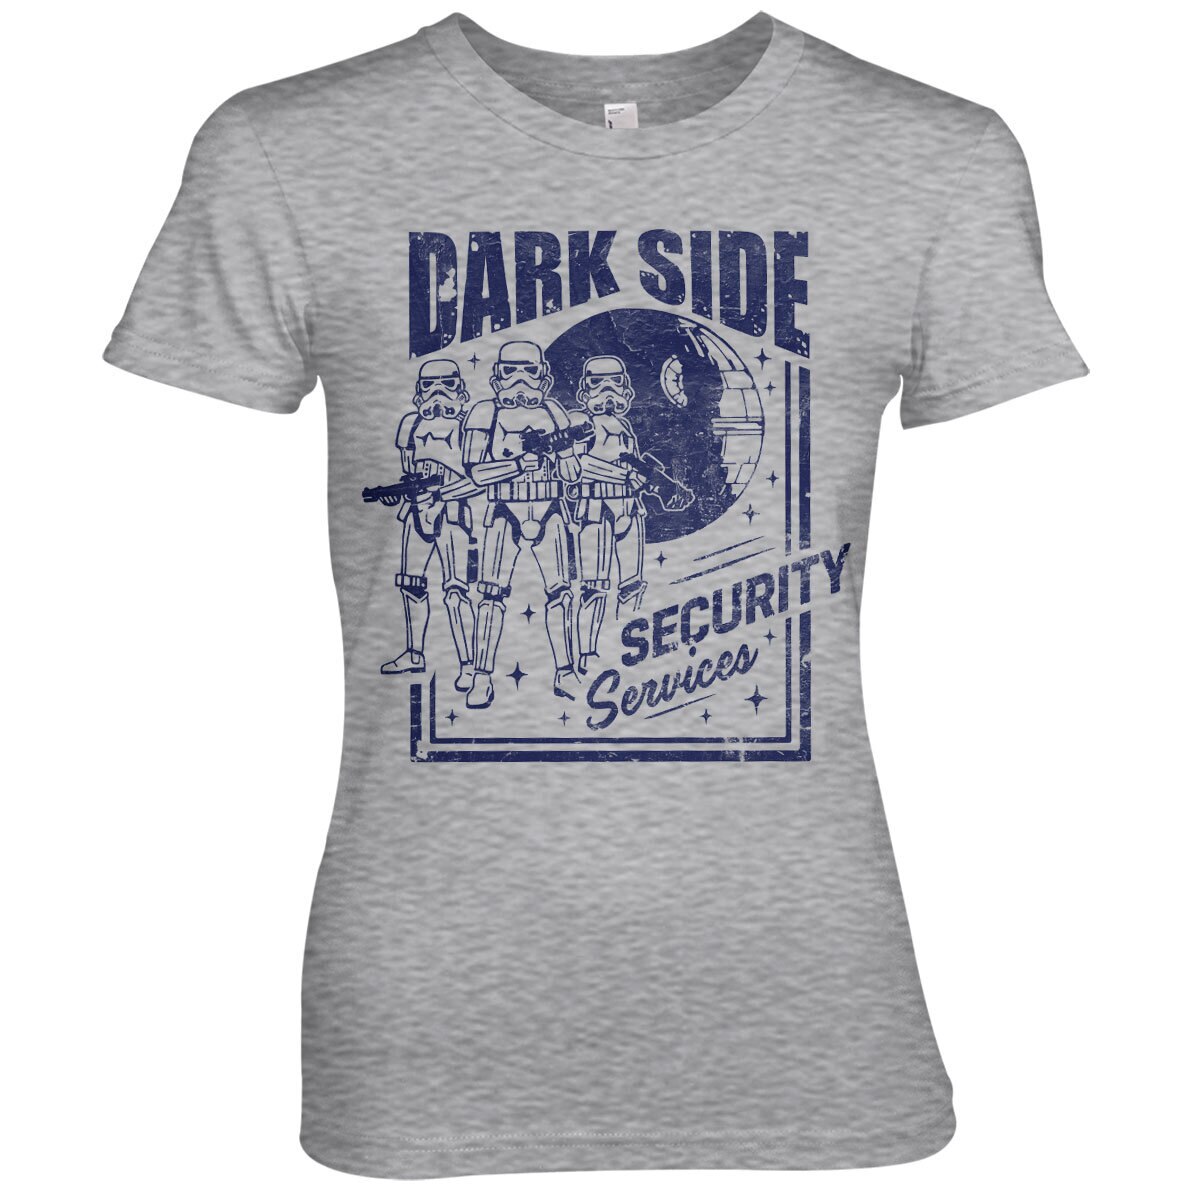 Dark Side Security Services Girly Tee